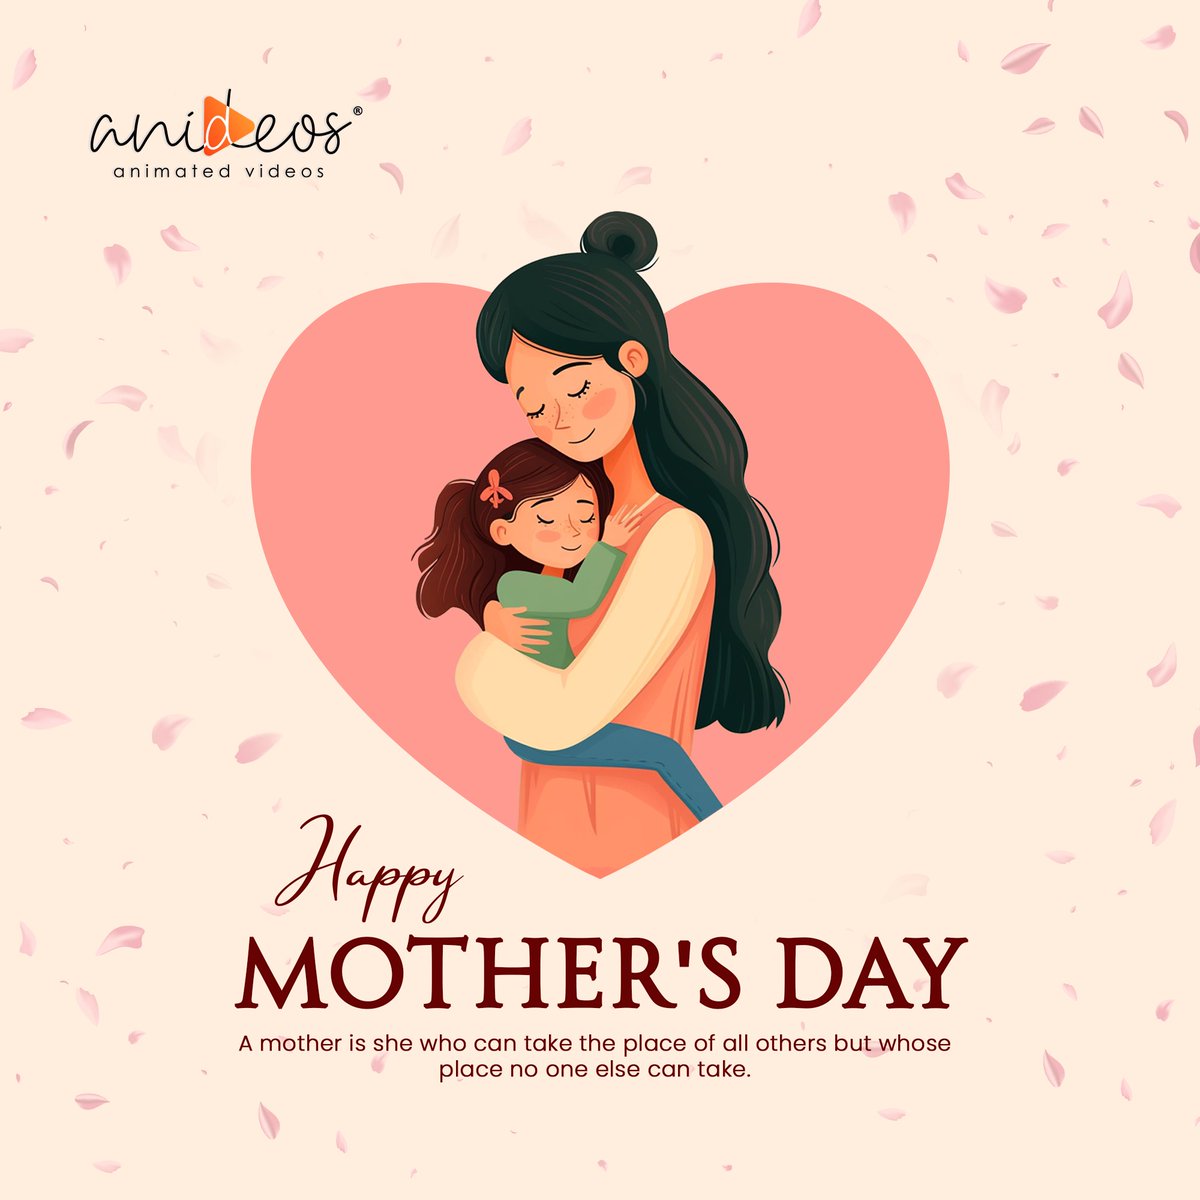 Behind every smile, every achievement, and every happy moment, there's a mother whose love and dedication made it all possible.

Today and every day, we honor the superheroes called mothers. Thank you for everything you do. 💖

#mothersday #lovemom #motherslove #happymothersday